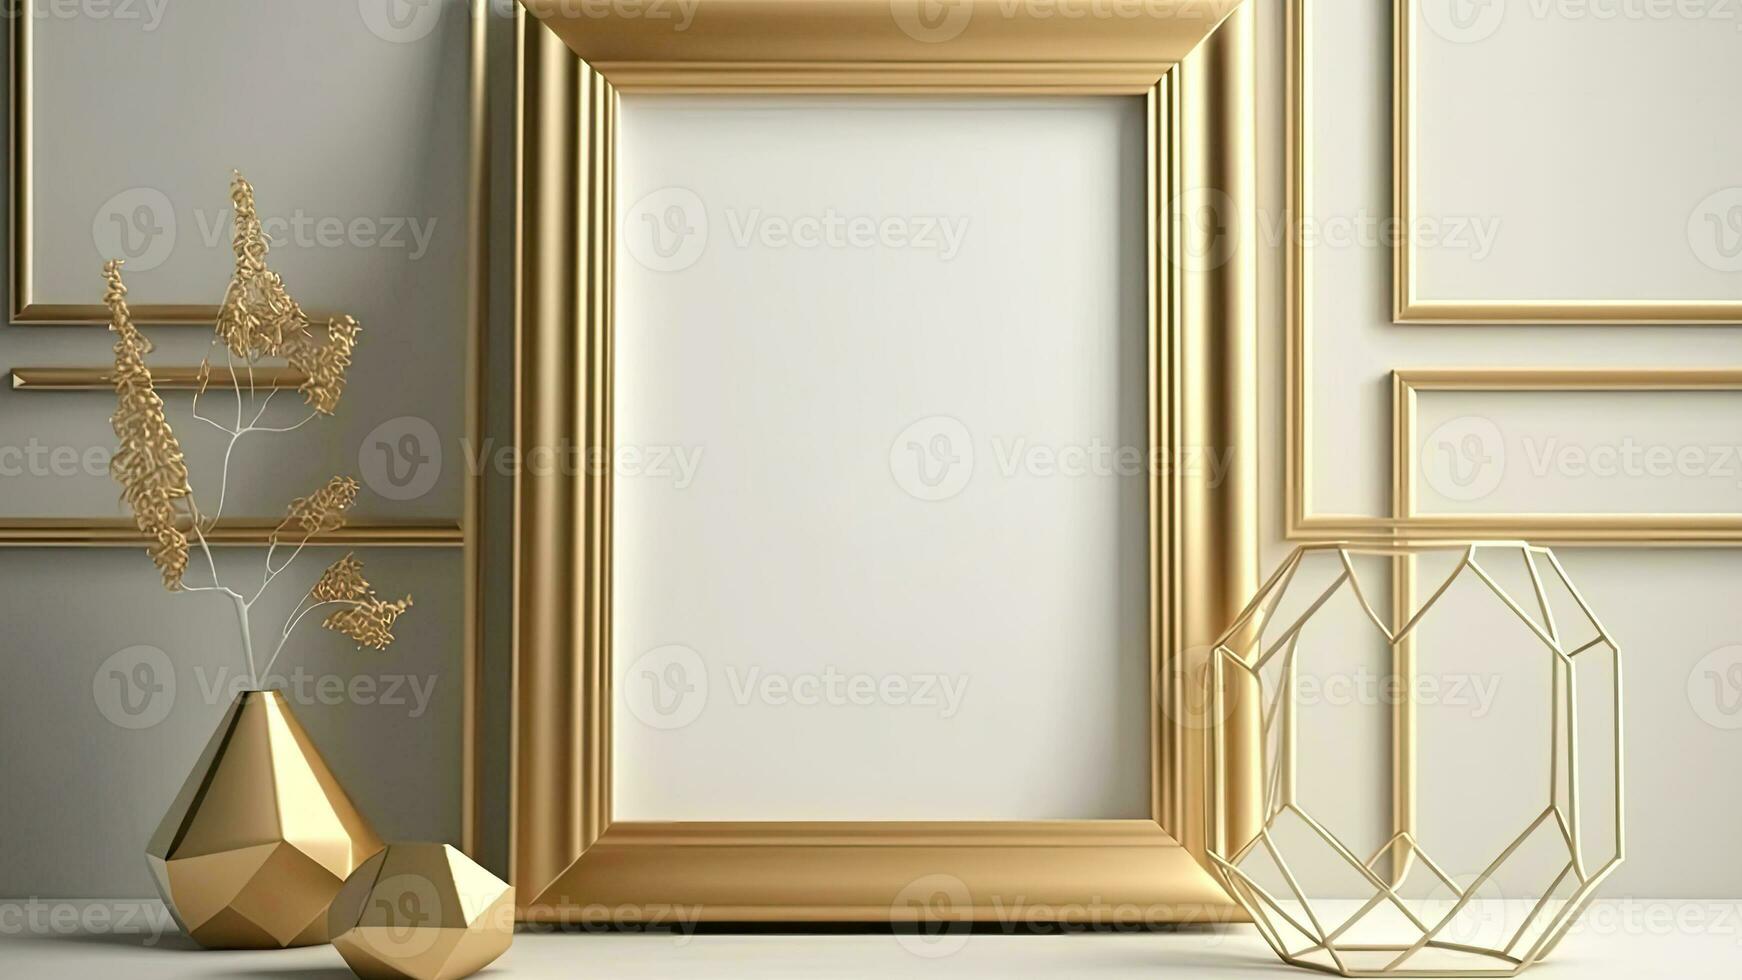 Scandinavian golden photo frame with indoor plants, and decoratives against grey walls.